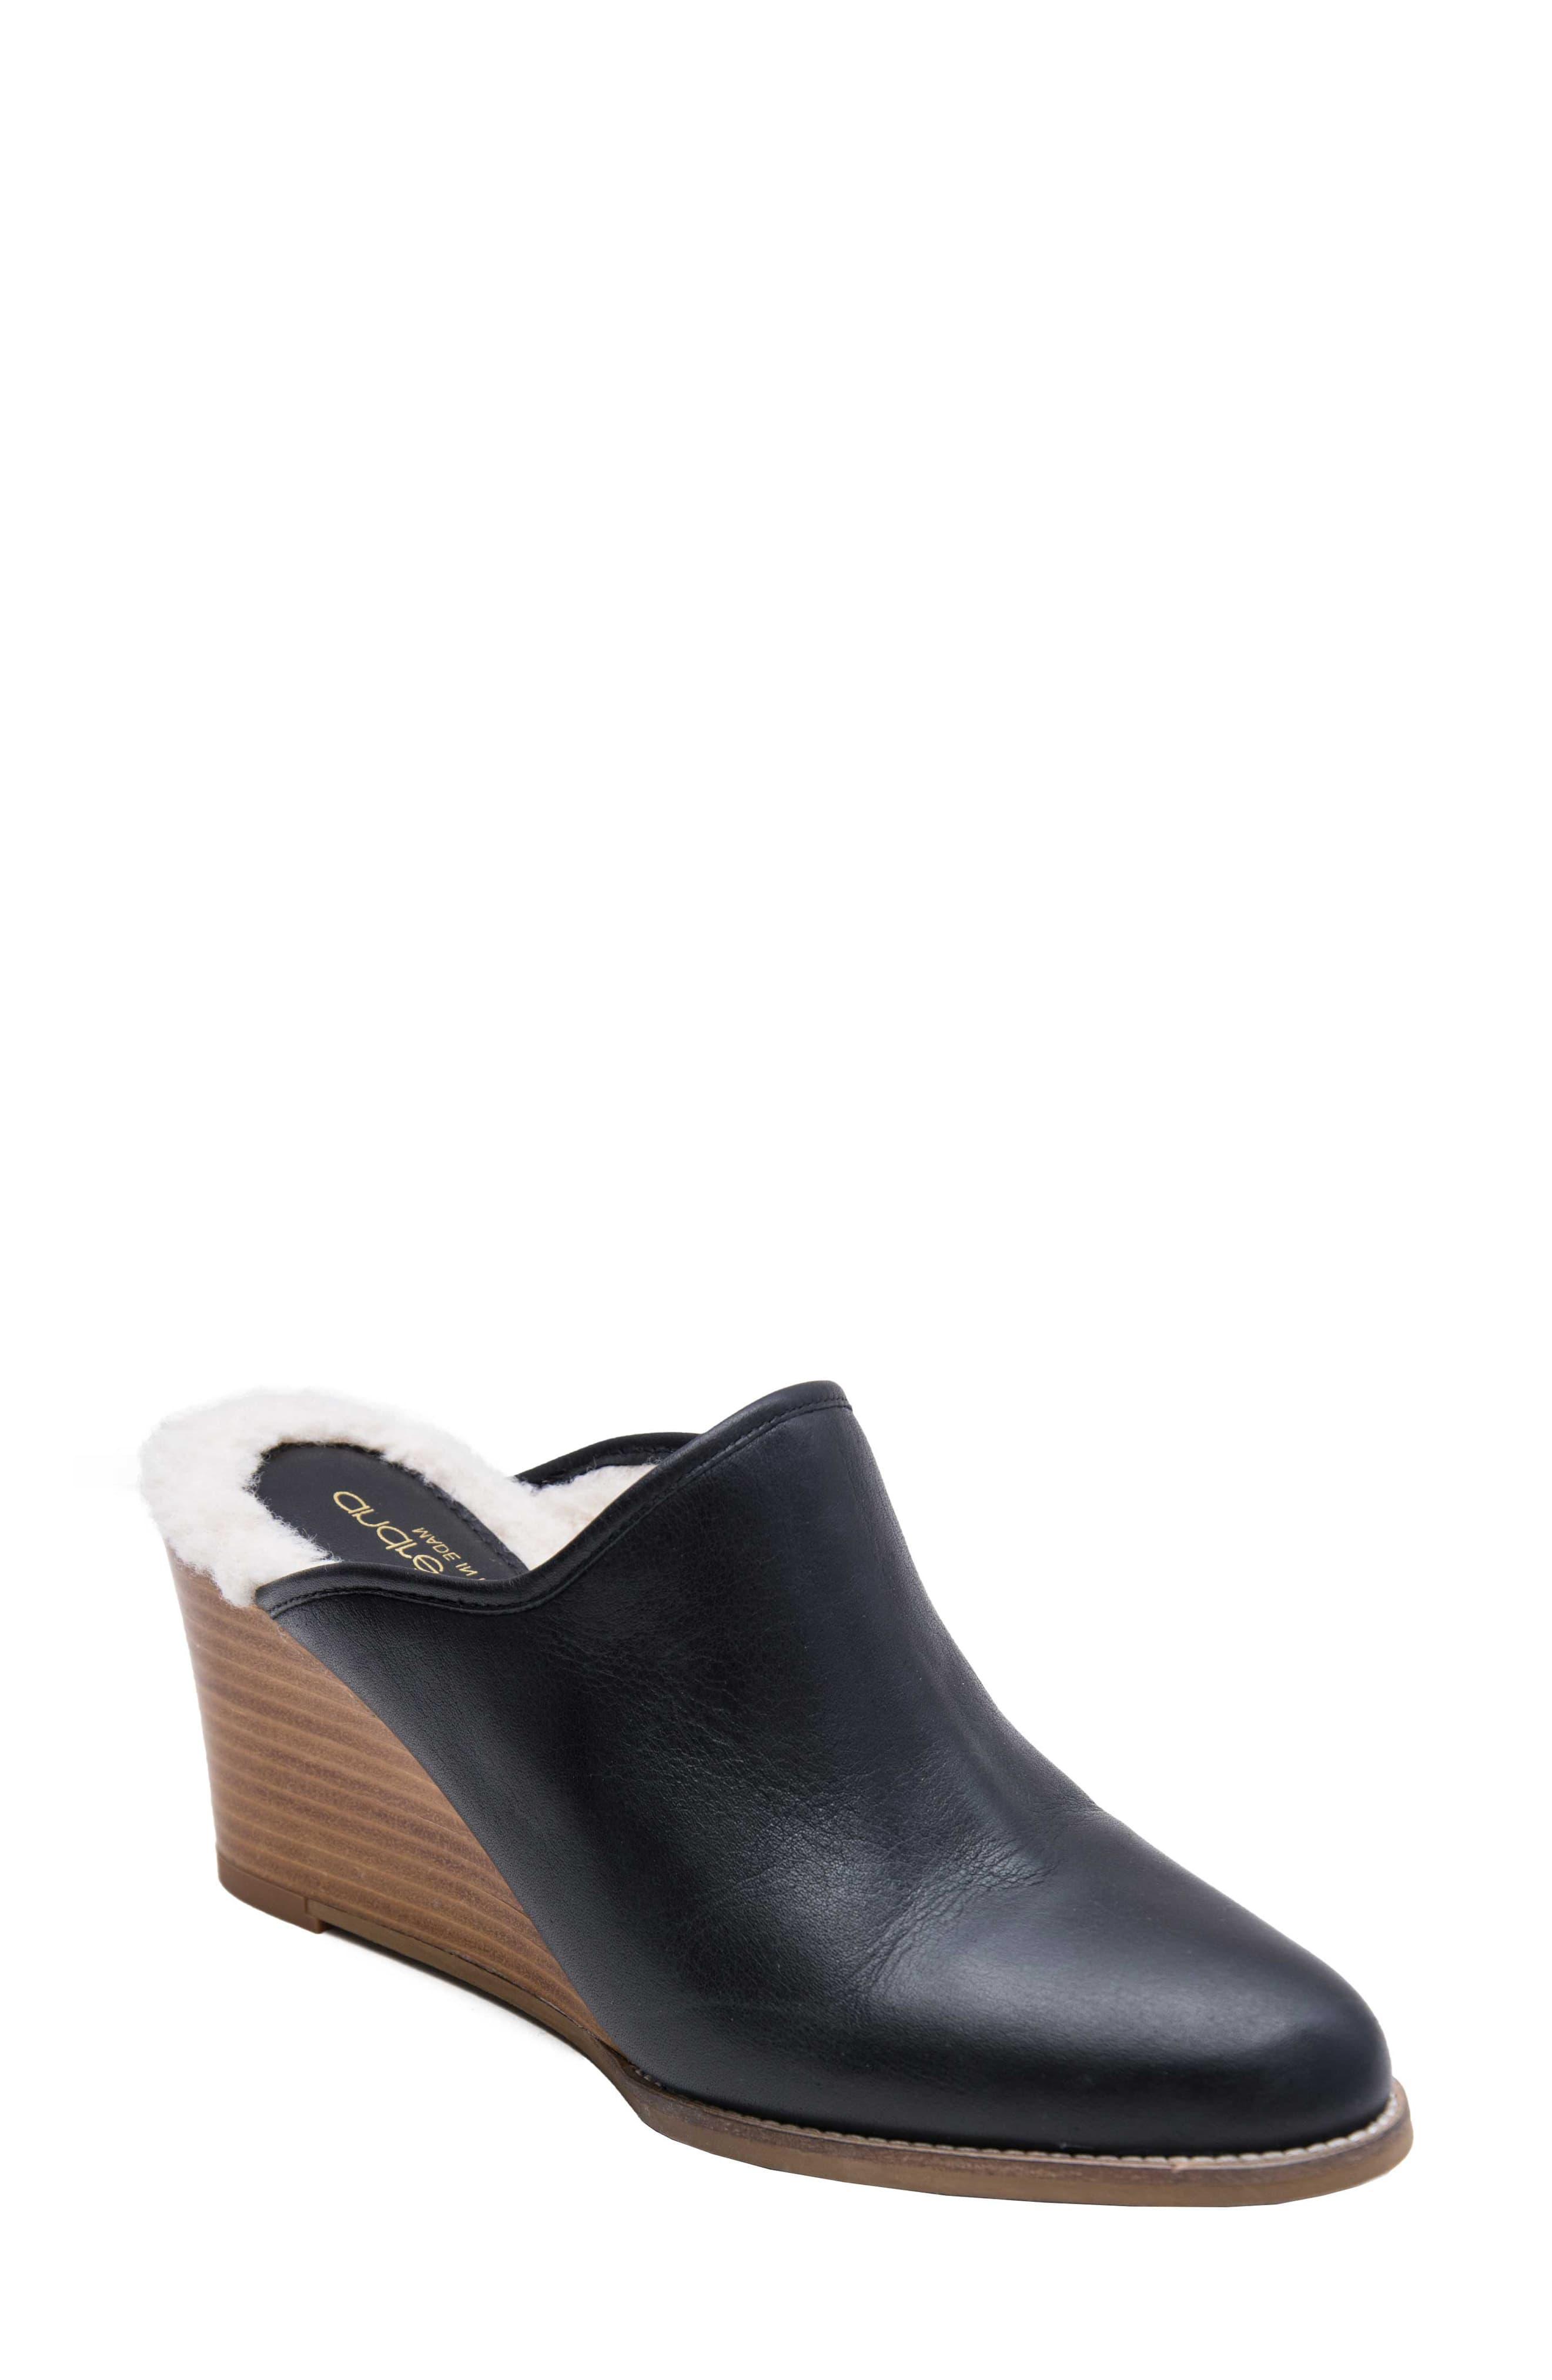 Andre Assous Sage Wedge Mule in Black Leather (Black) - Lyst